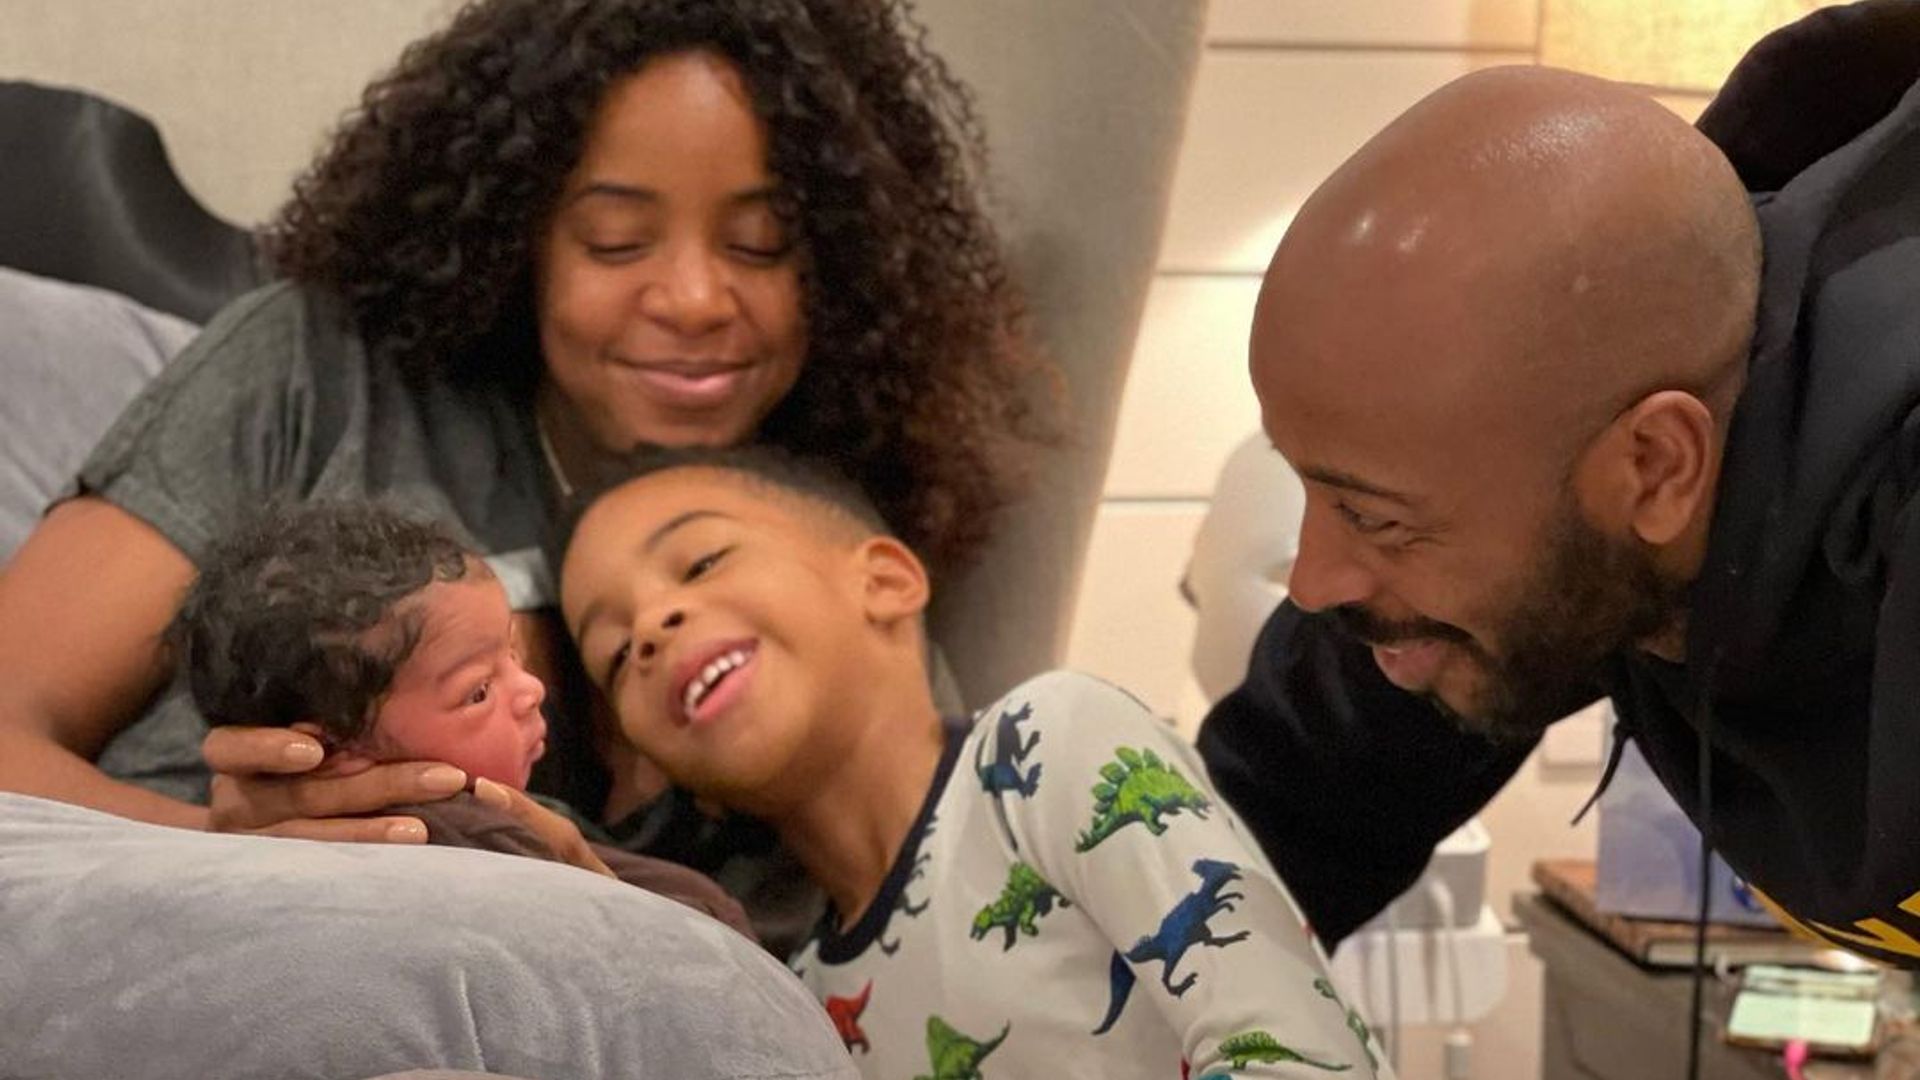 Kelly Rowland's pregnancies and thoughts on expanding her family of 4